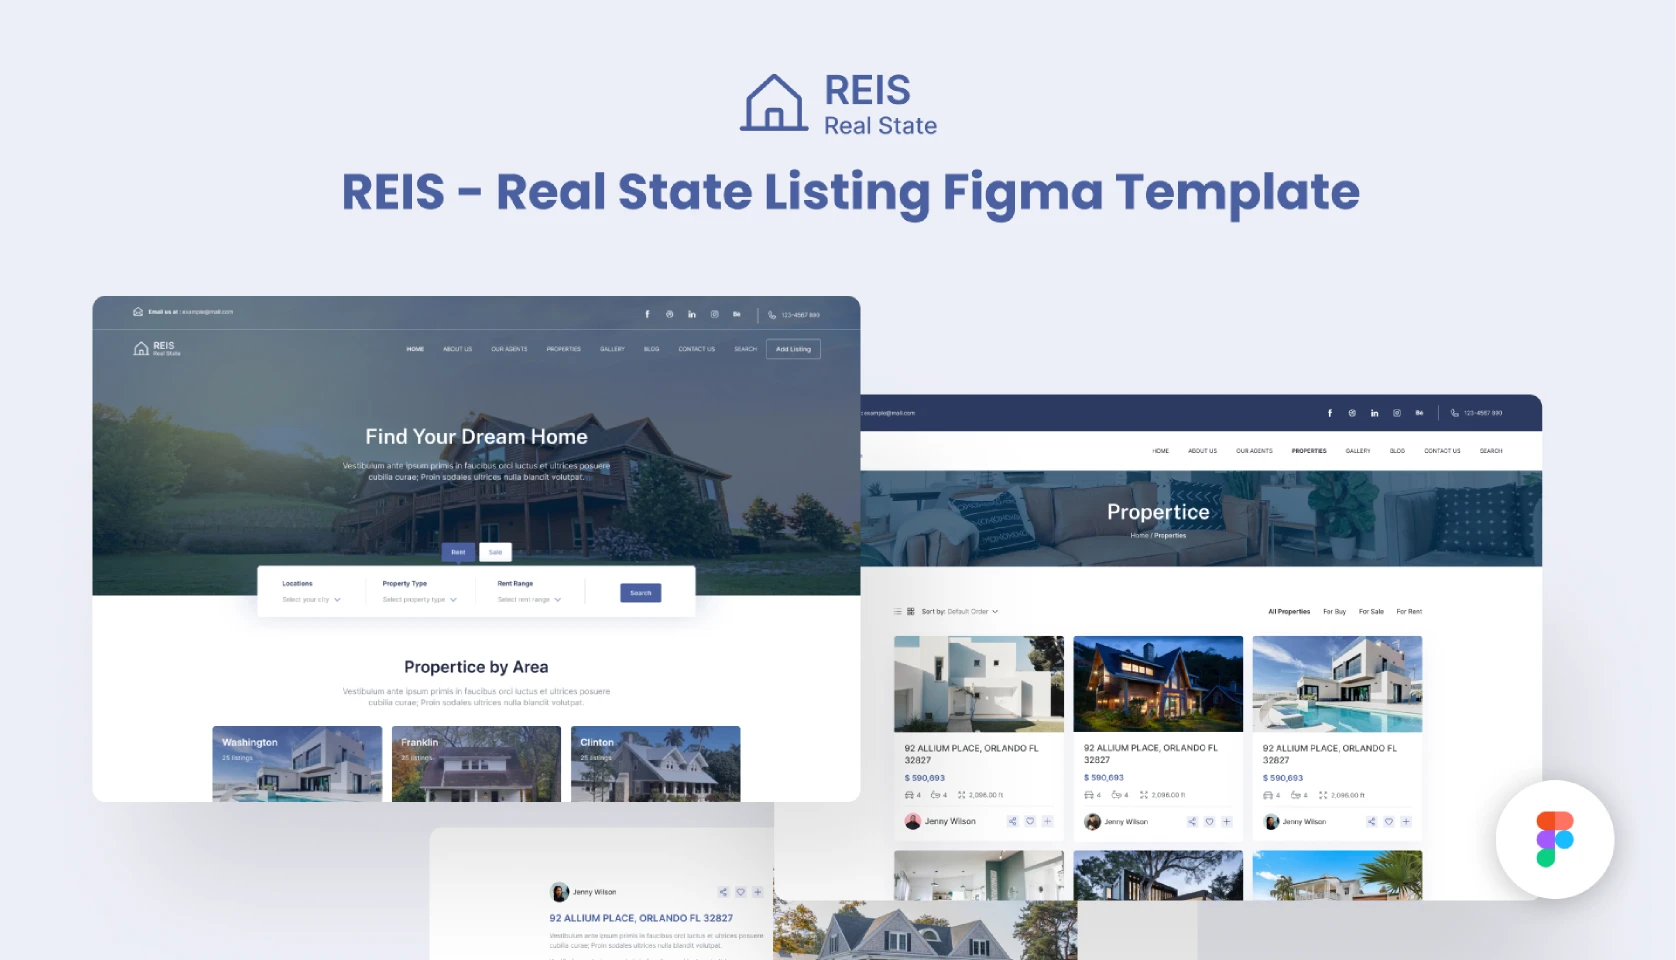 REIS - Real State Listing Figma Template (Community) for Figma and Adobe XD